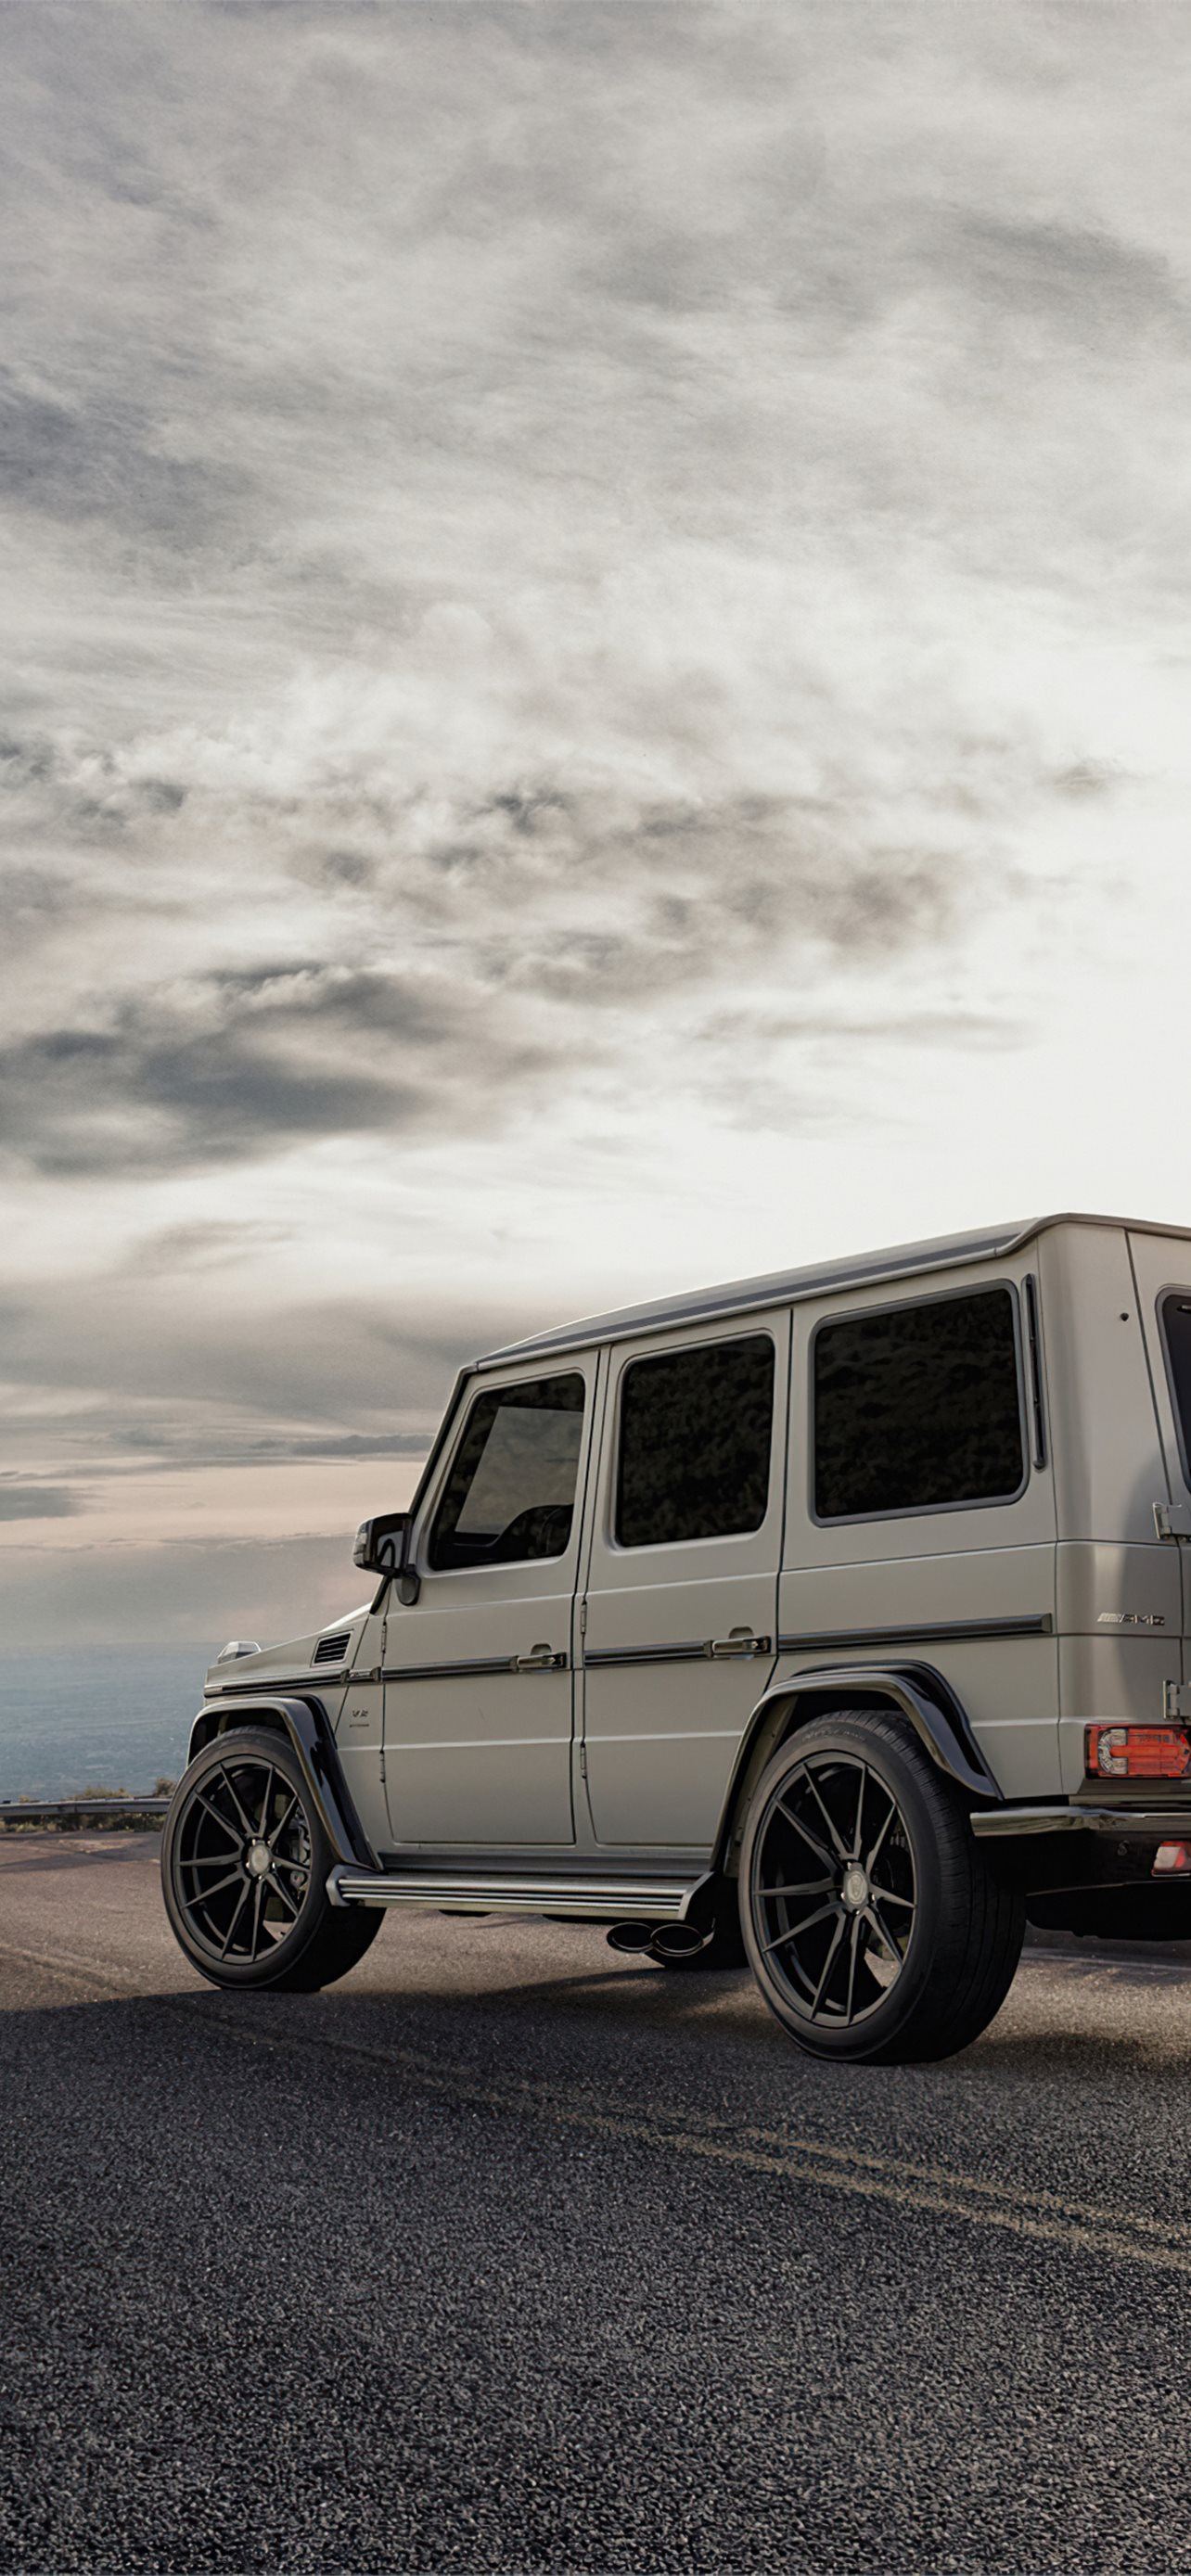 Mercedes Benz G Class Iphone Wallpapers Free Download